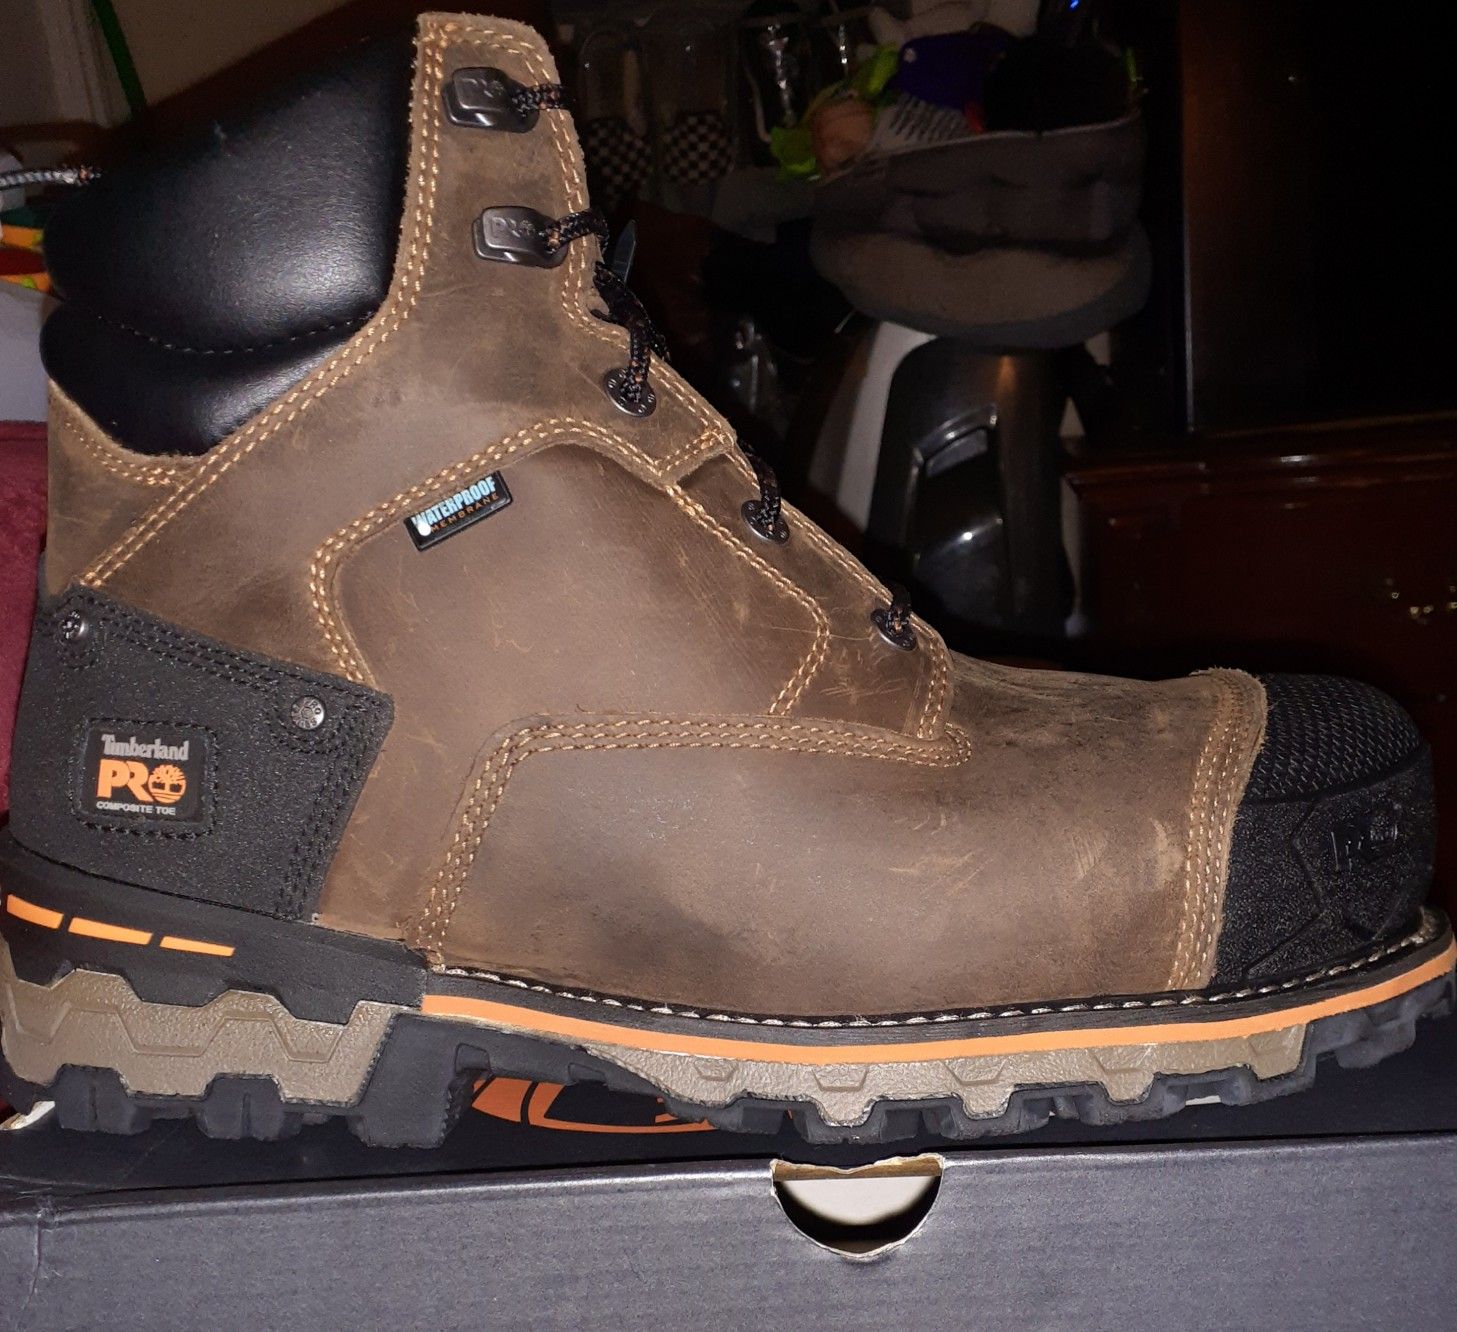 New Timberland Boondock work boots for men composite safety toe waterproof size 9.5 $125